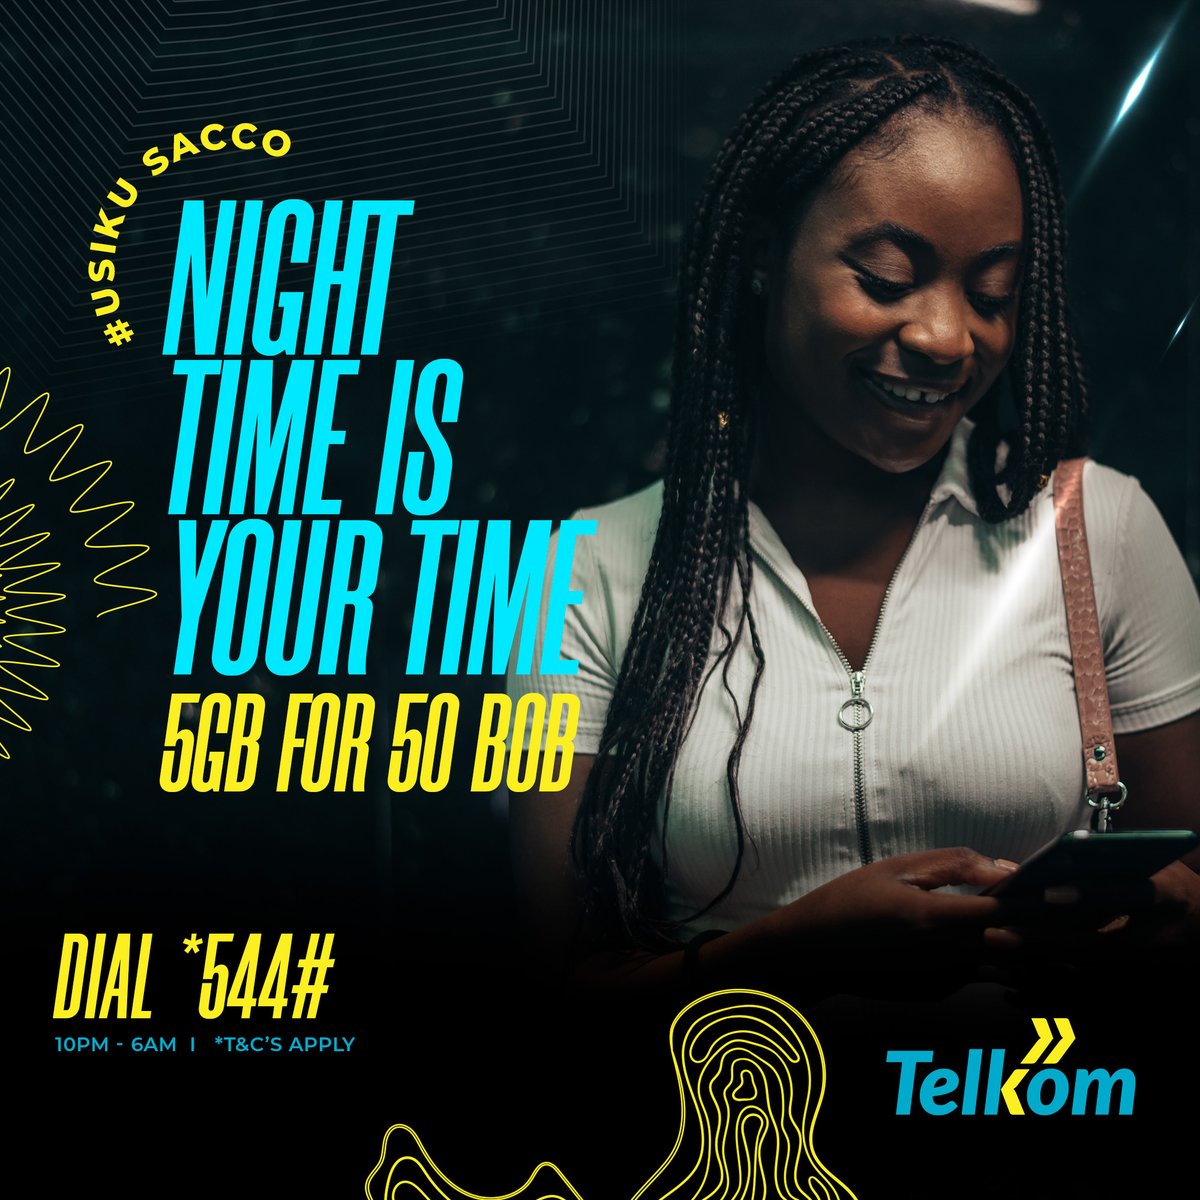 Night owls Assemble! Transform your nights with #UsikuSacco! For just 50 bob, enjoy 5GB to fuel your late-night escapades. Whether it's series marathons, movie nights, or study sessions, simply dial *544*2# and take charge of your night.